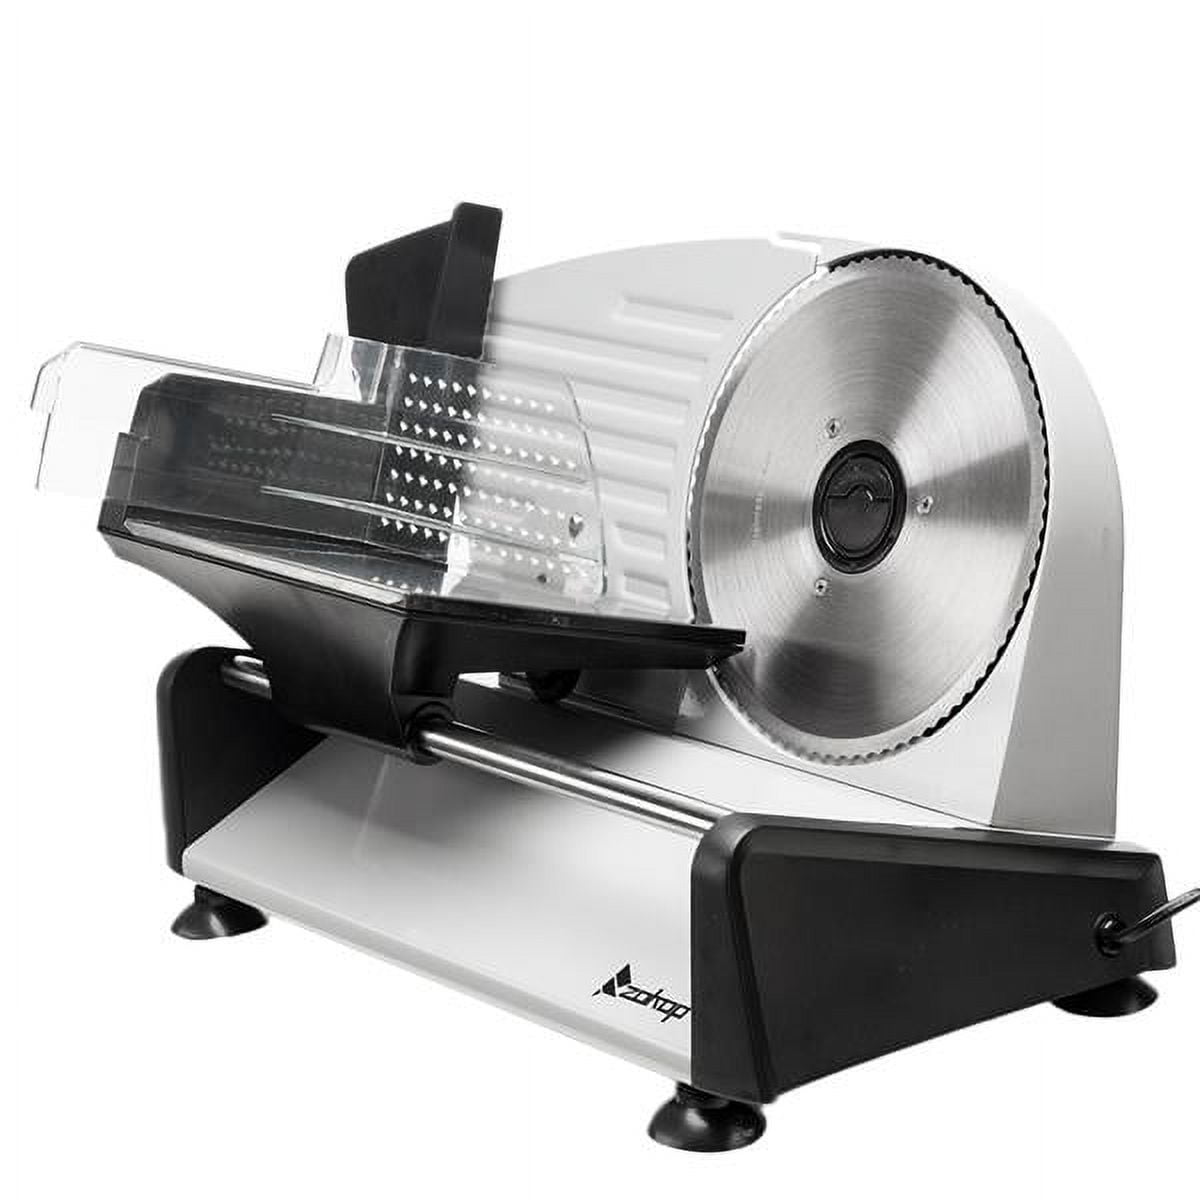 Electric Bread Slicer - All-Purpose Slicer & Sausage Cutter with 19 cm  Stainless Steel Blades, Adjustable Food Processor 0 to 15 mm for